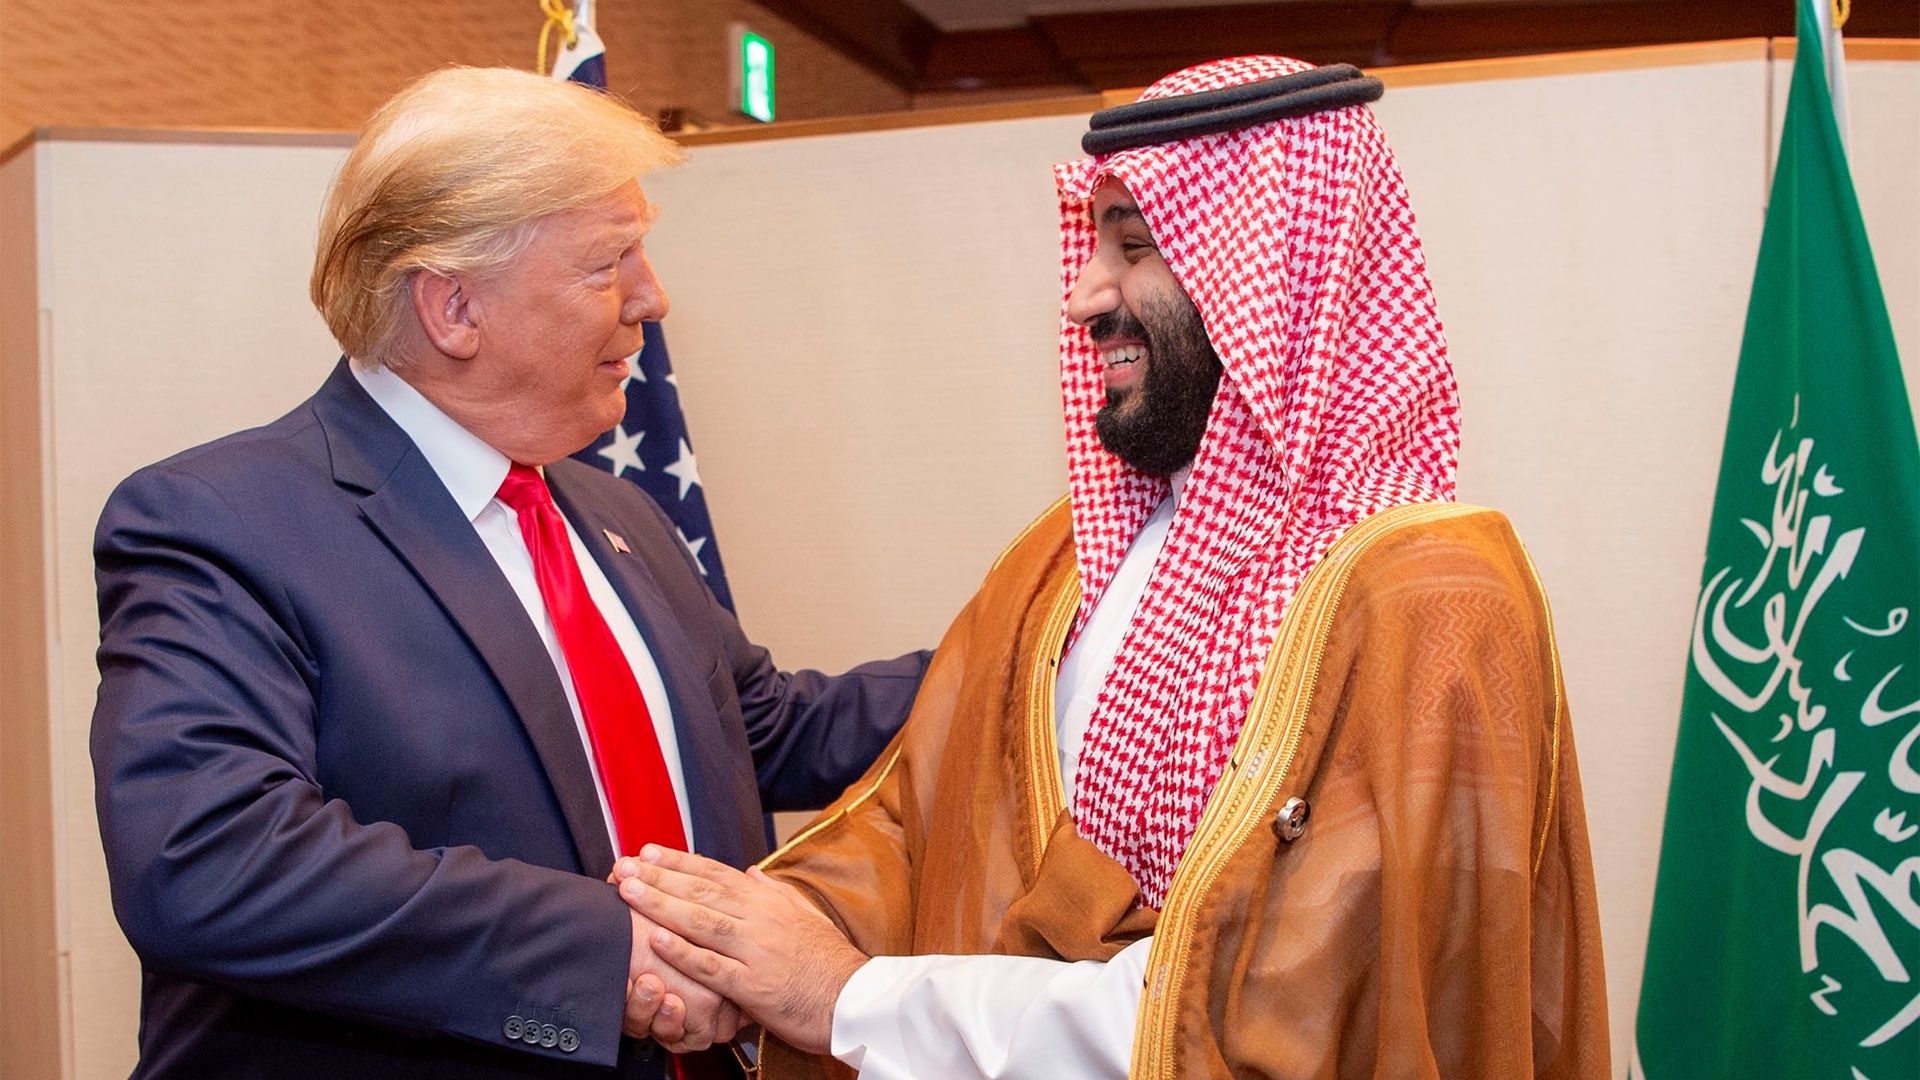 In this image, Trump smiles and shakes hands with MBS.